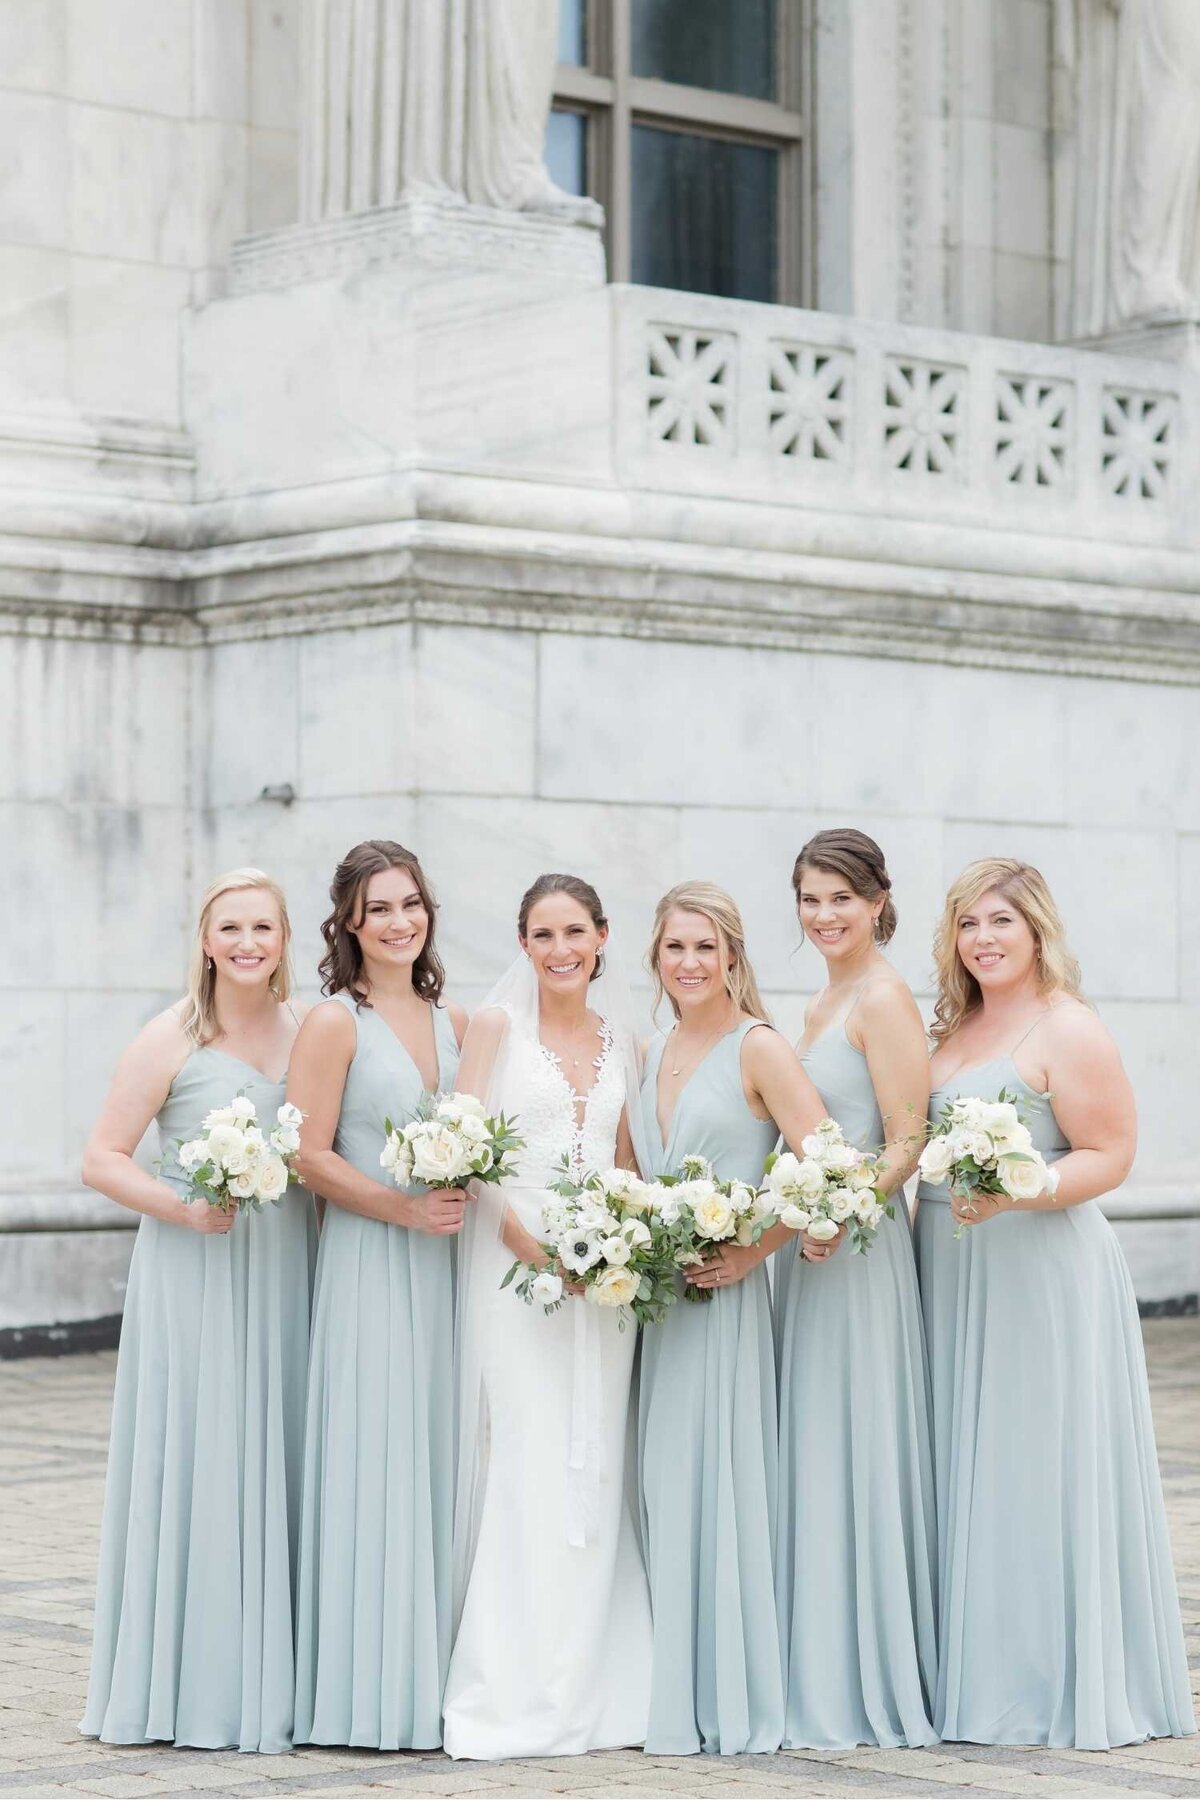 Bride and Bridesmaids photos outside Museum Campus before a Luxury Chicago Outdoor Historic Wedding Venue.